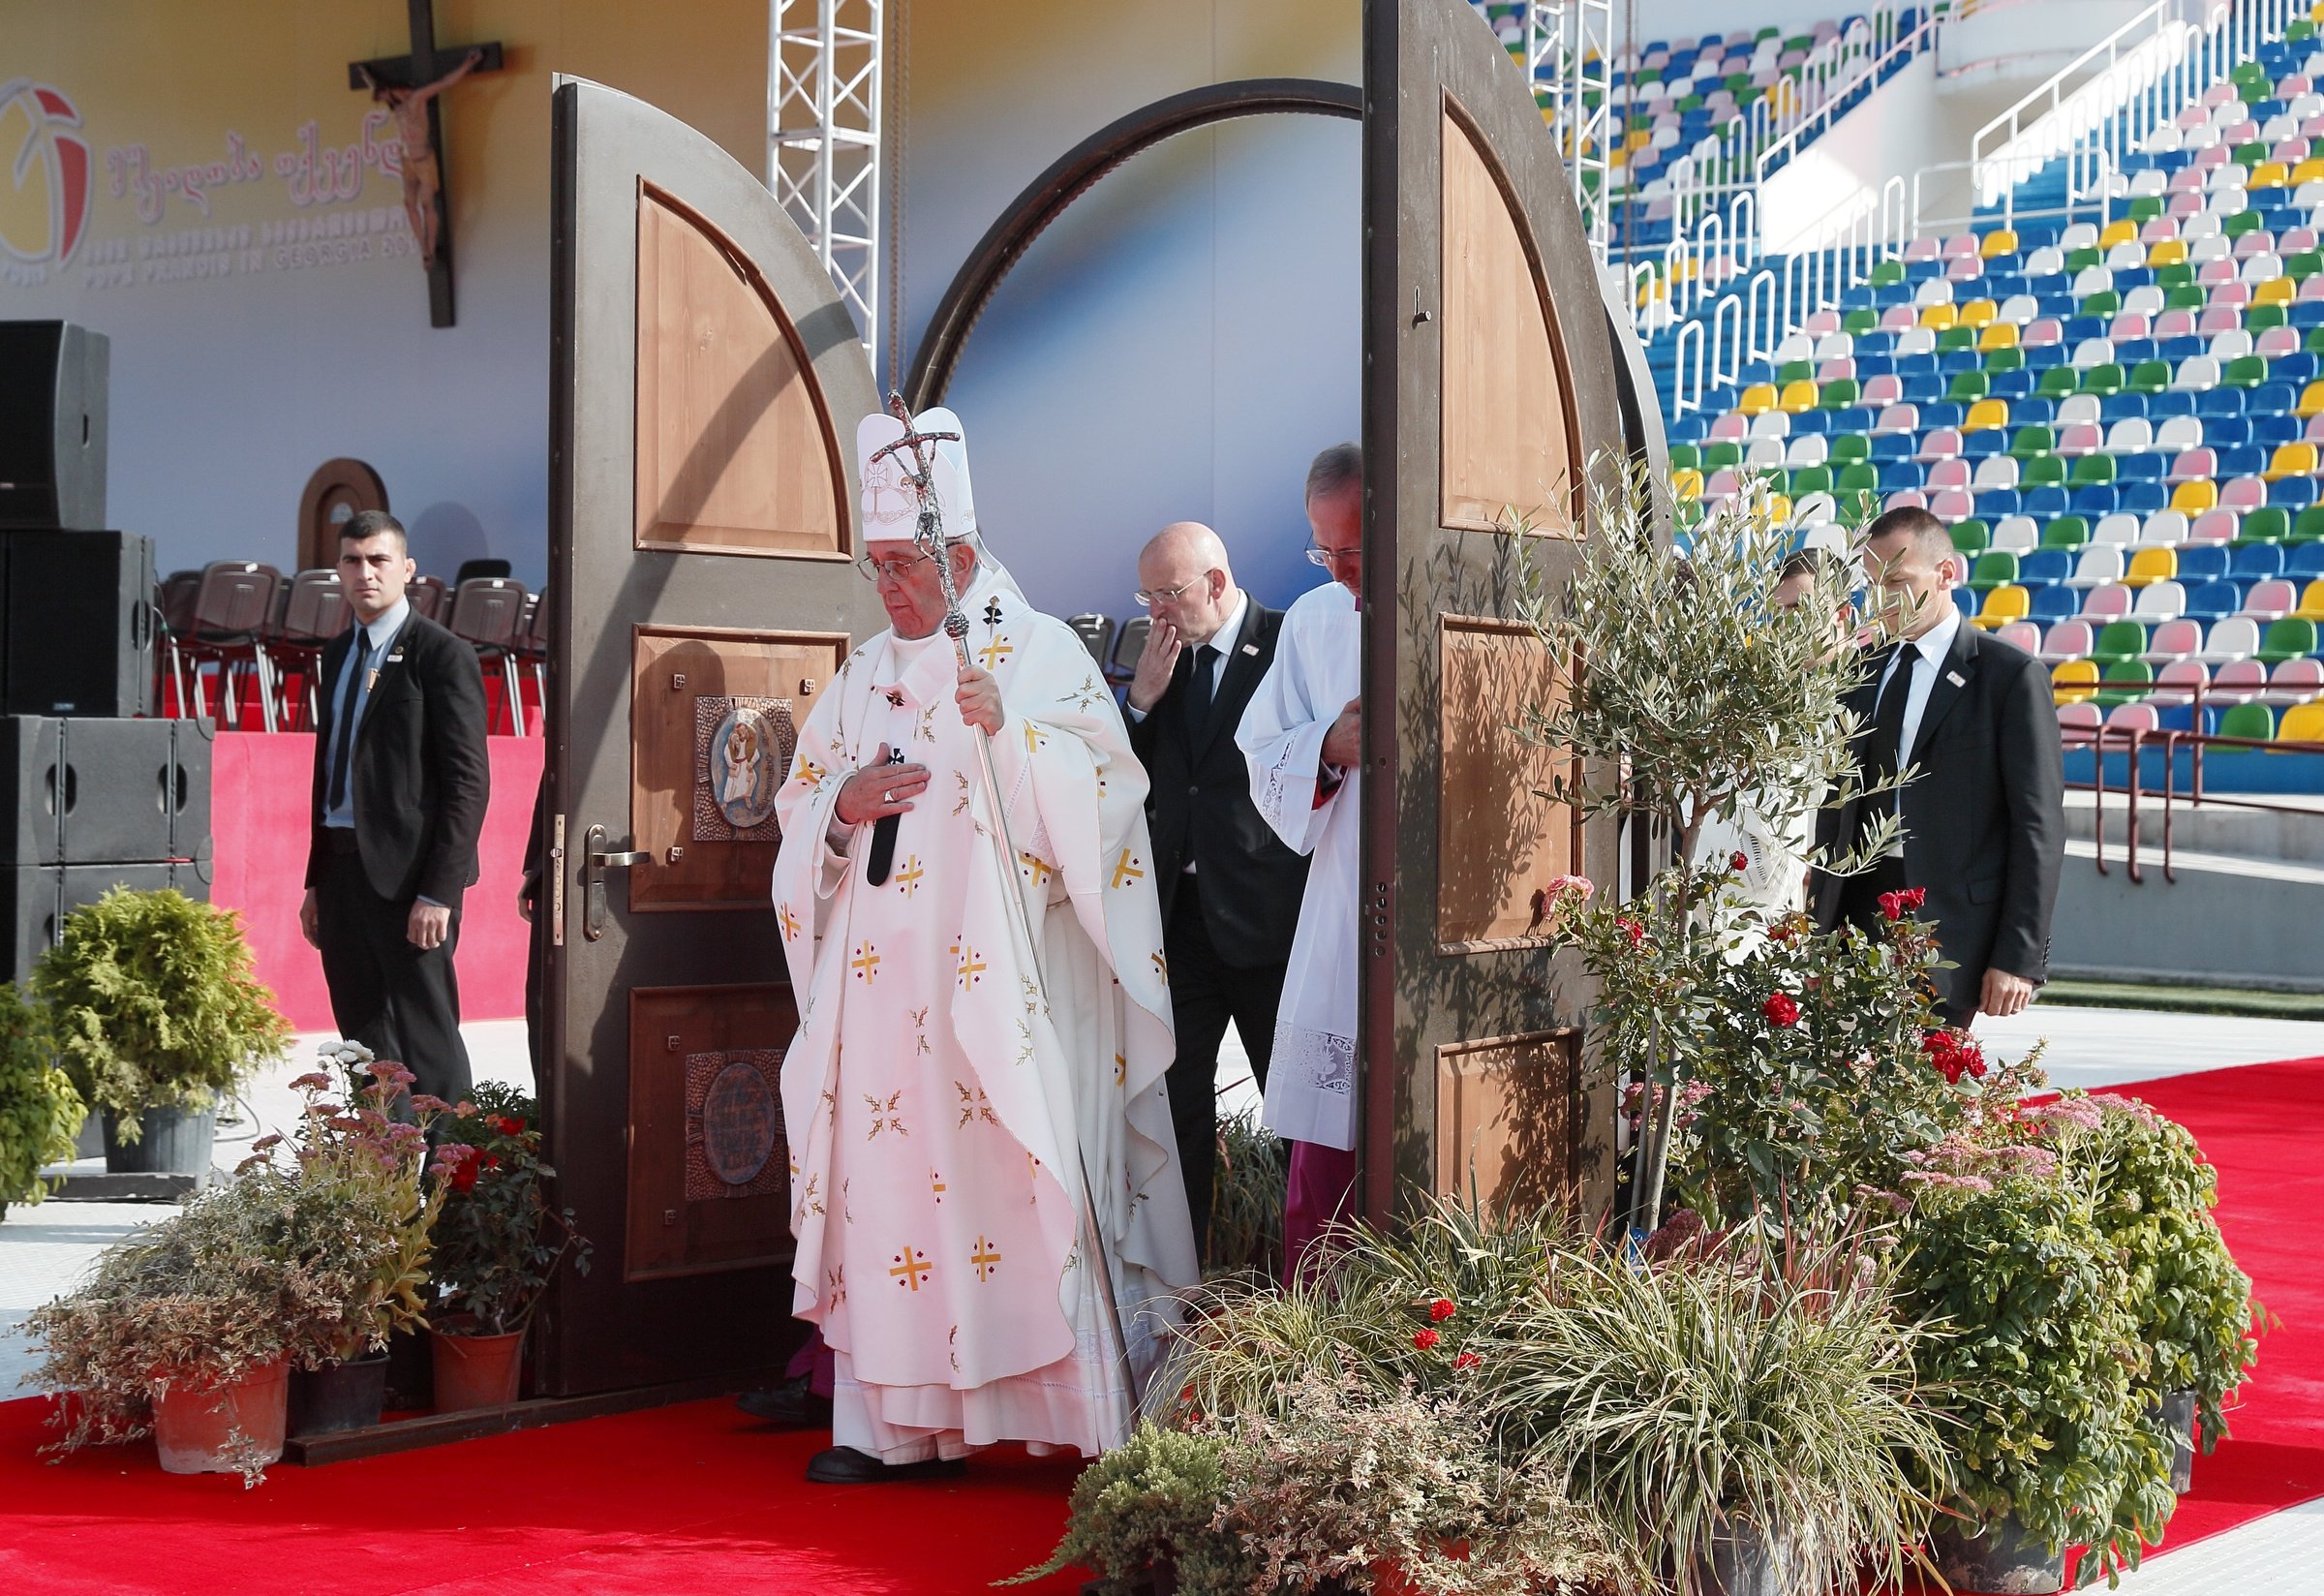 Pope Francis walks through a Holy Door as he arrives to celebrate Mass at Mikheil Meskhi Stadium in Tbilisi, Georgia, in this Oct. 1, 2016. (CNS photo/Paul Haring)